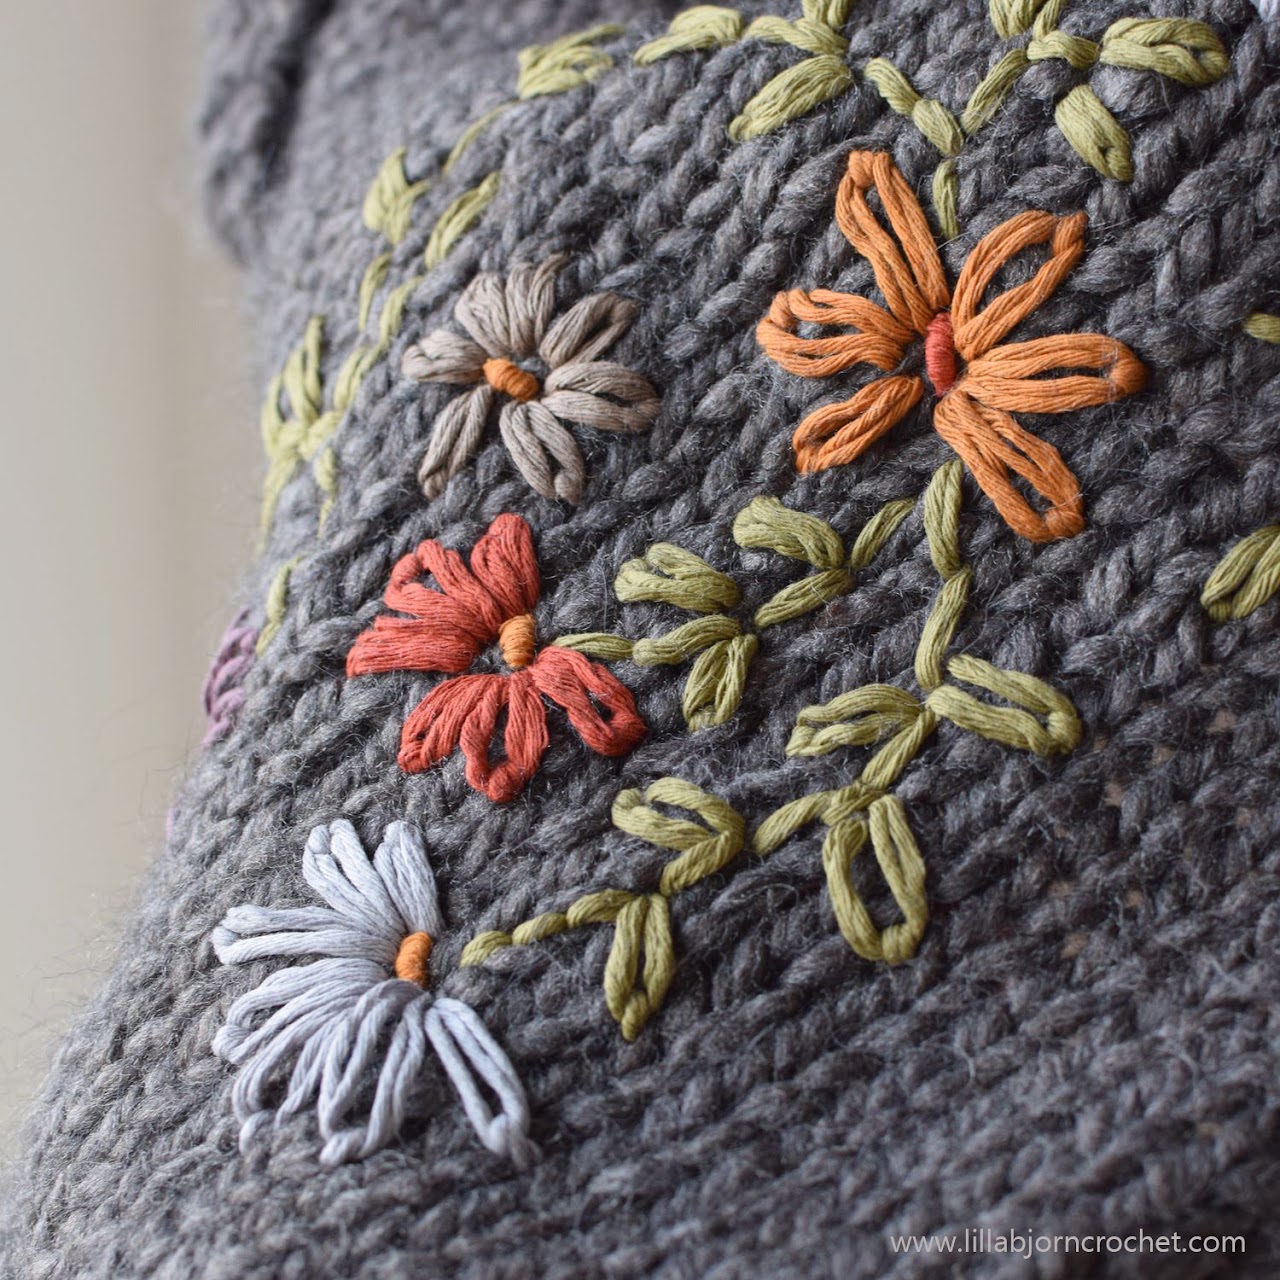 How to embroider on knit and crochet